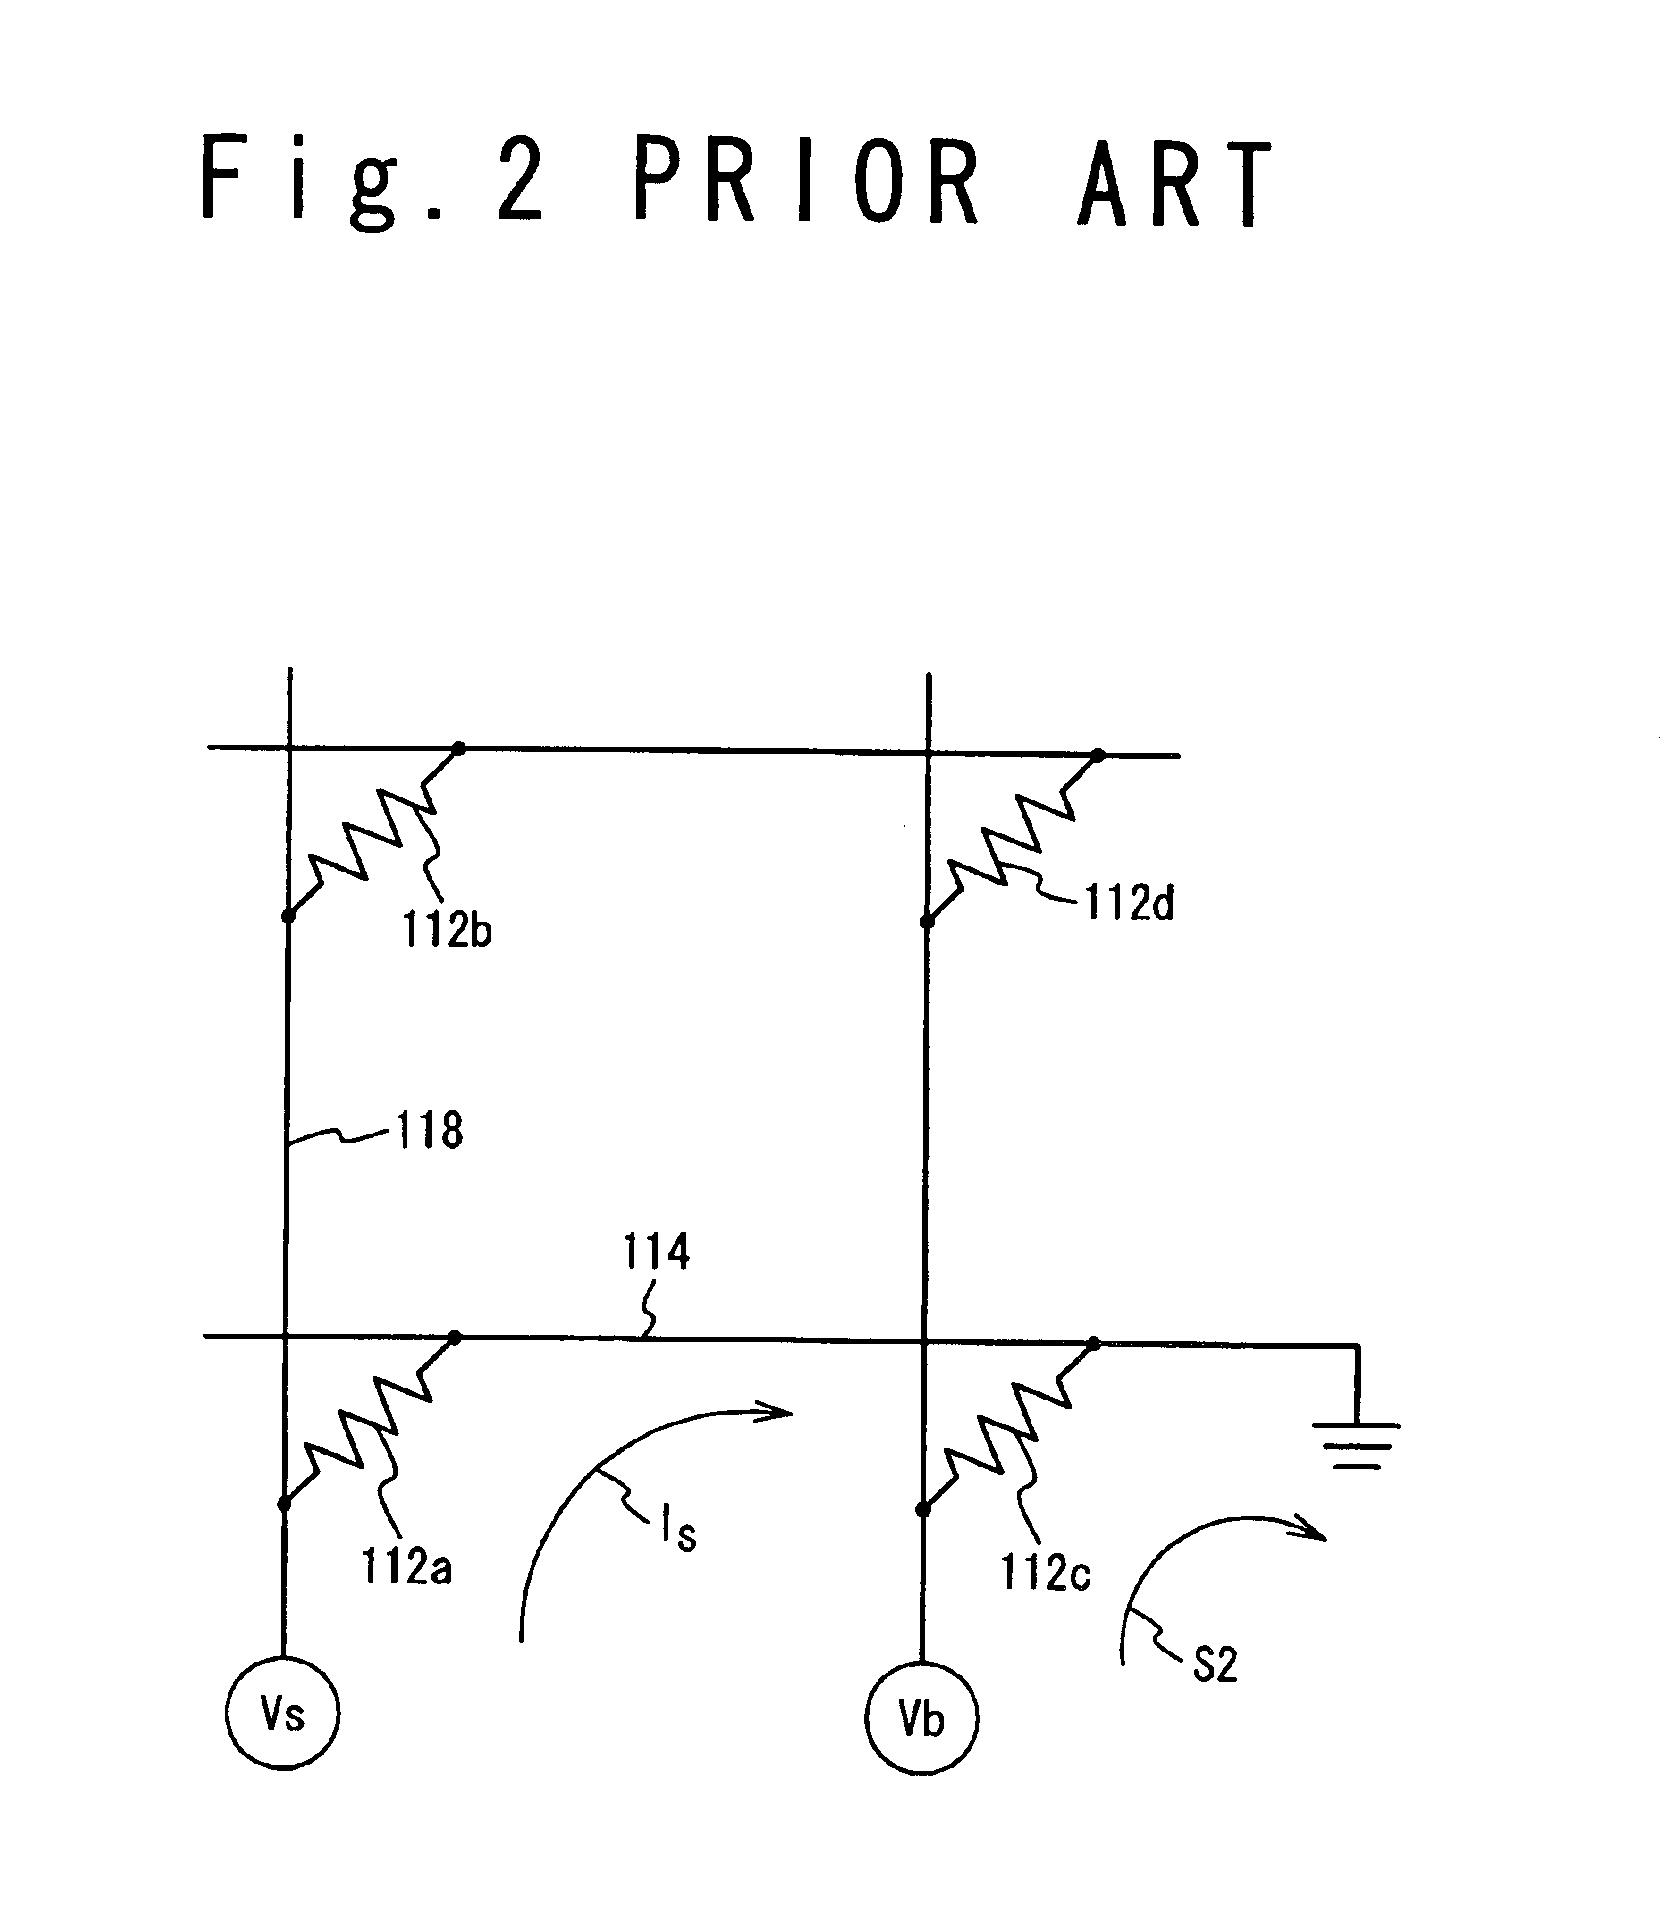 Magnetic random access memory including a cell array having a magneto-resistance element